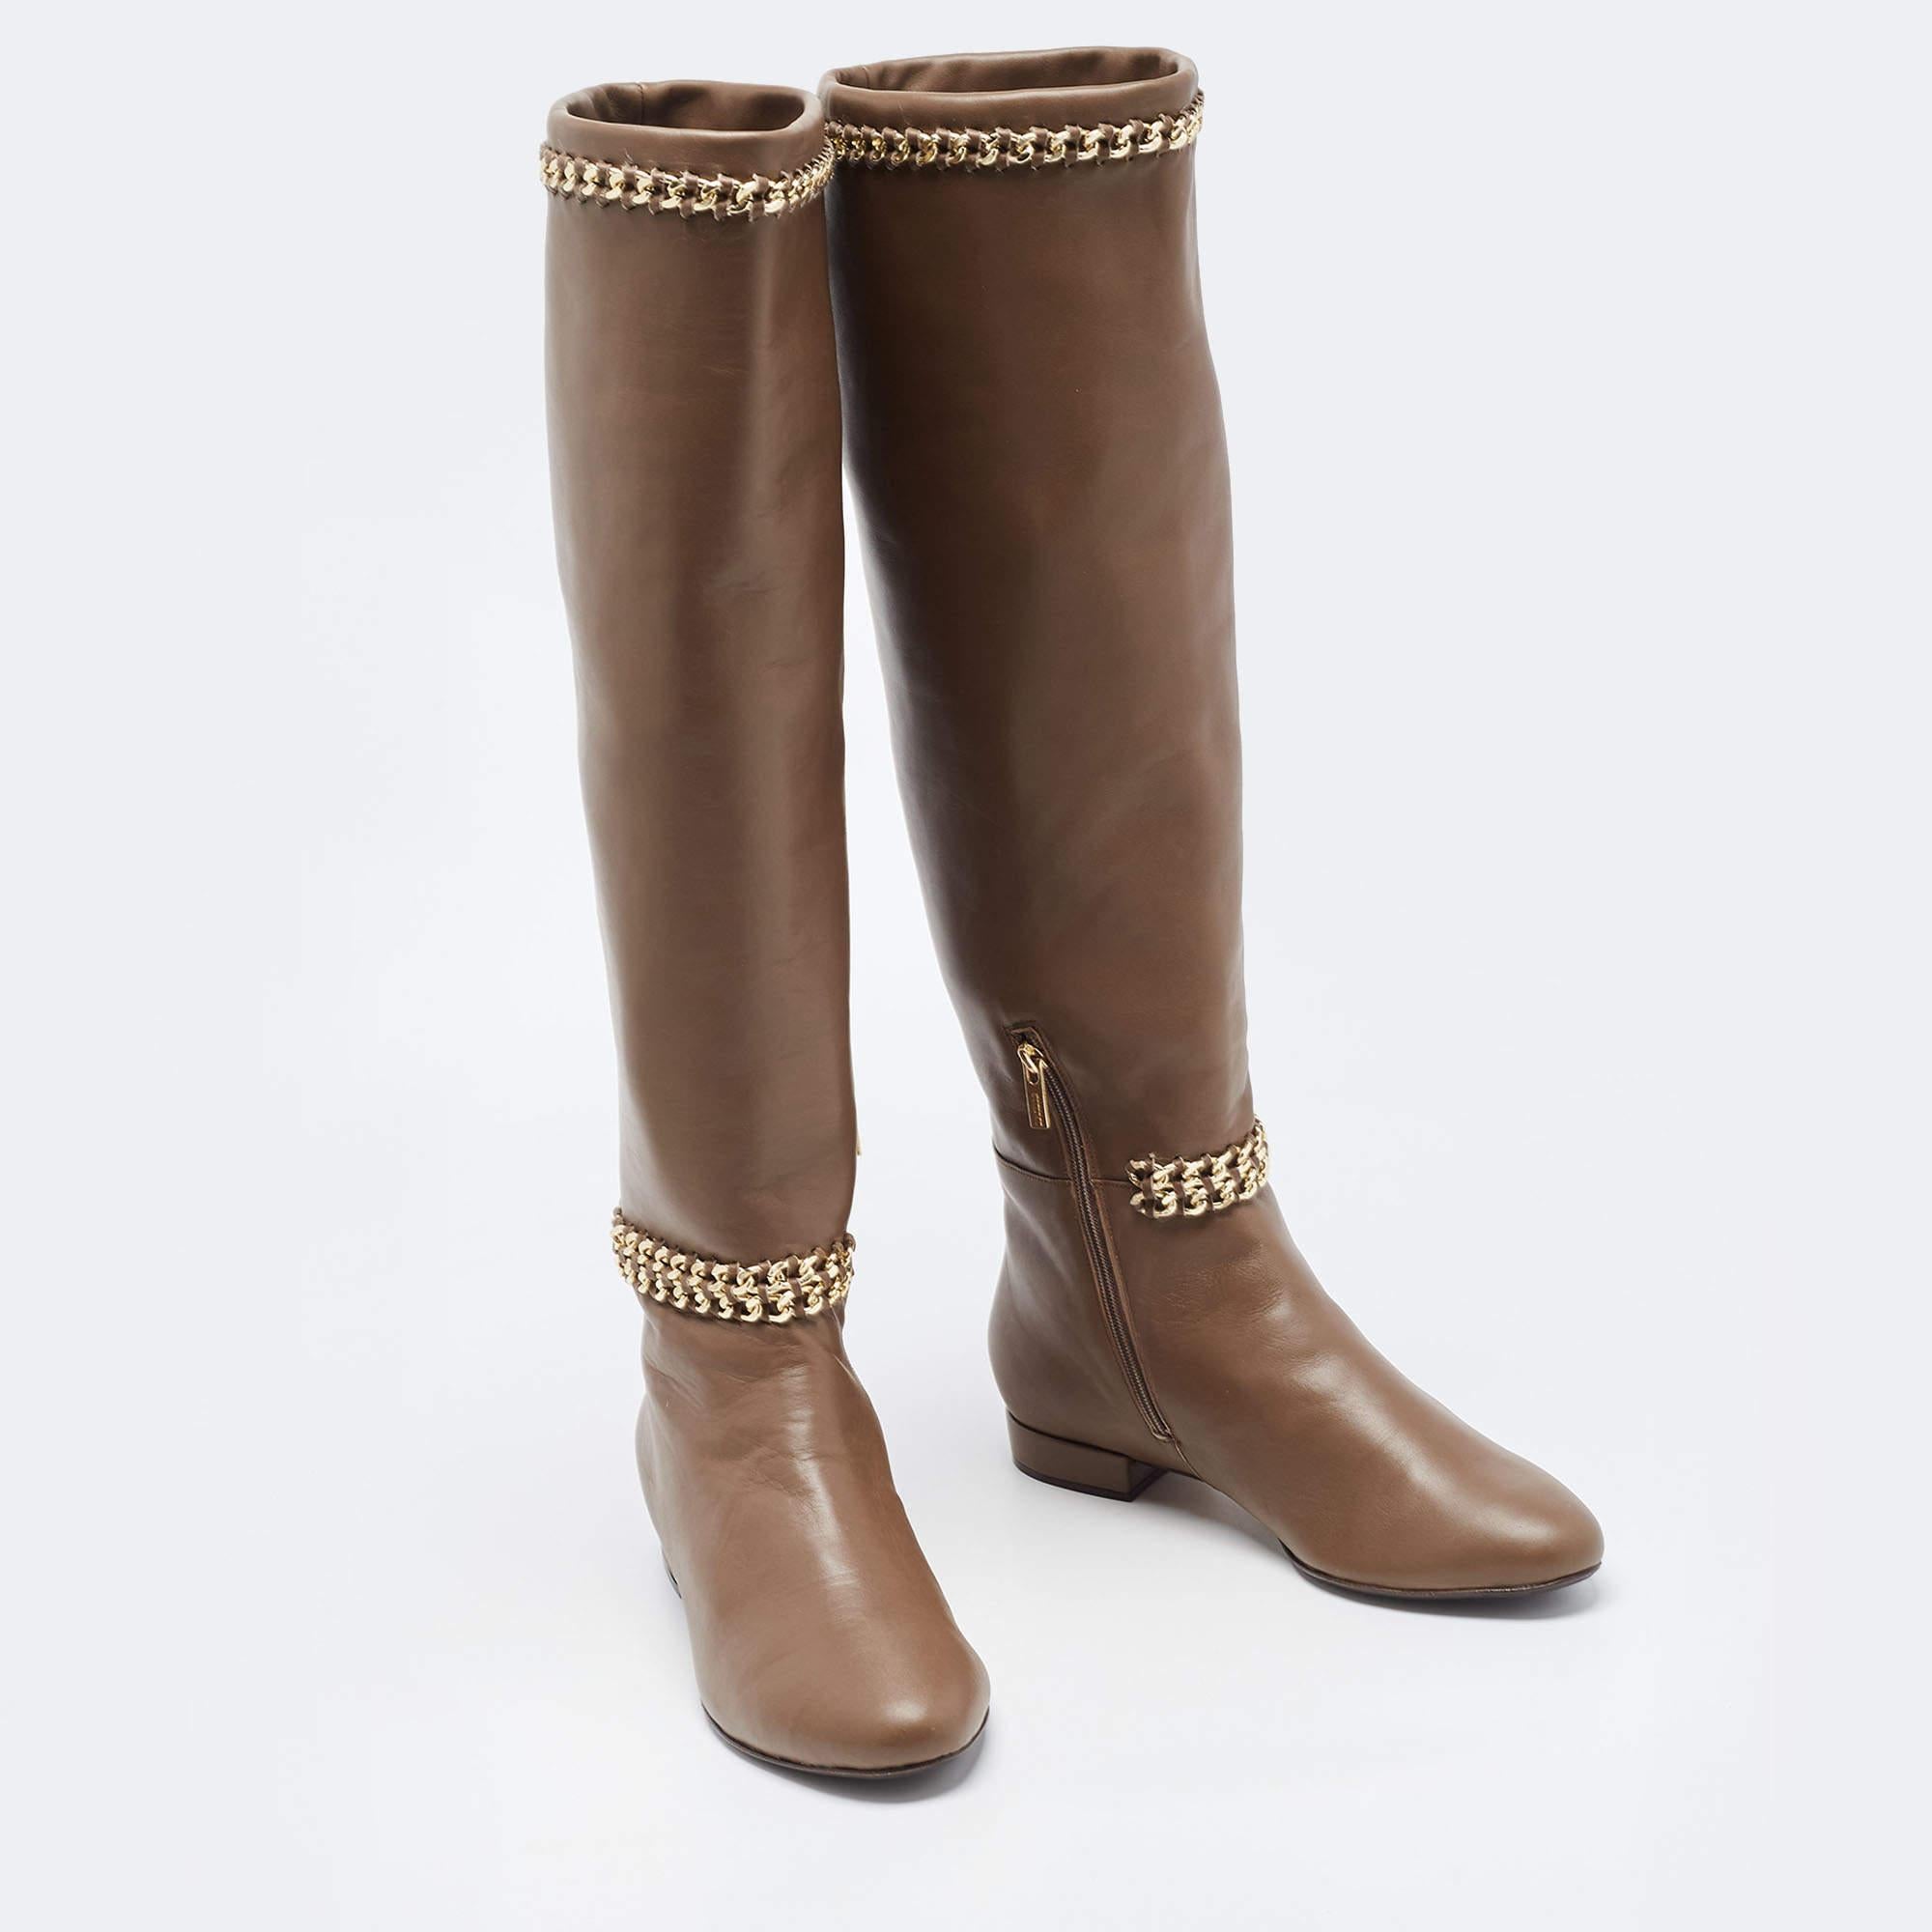 Le Silla Brown Leather Chain Detail Knee Length Boots Size 37.5 For Sale 2